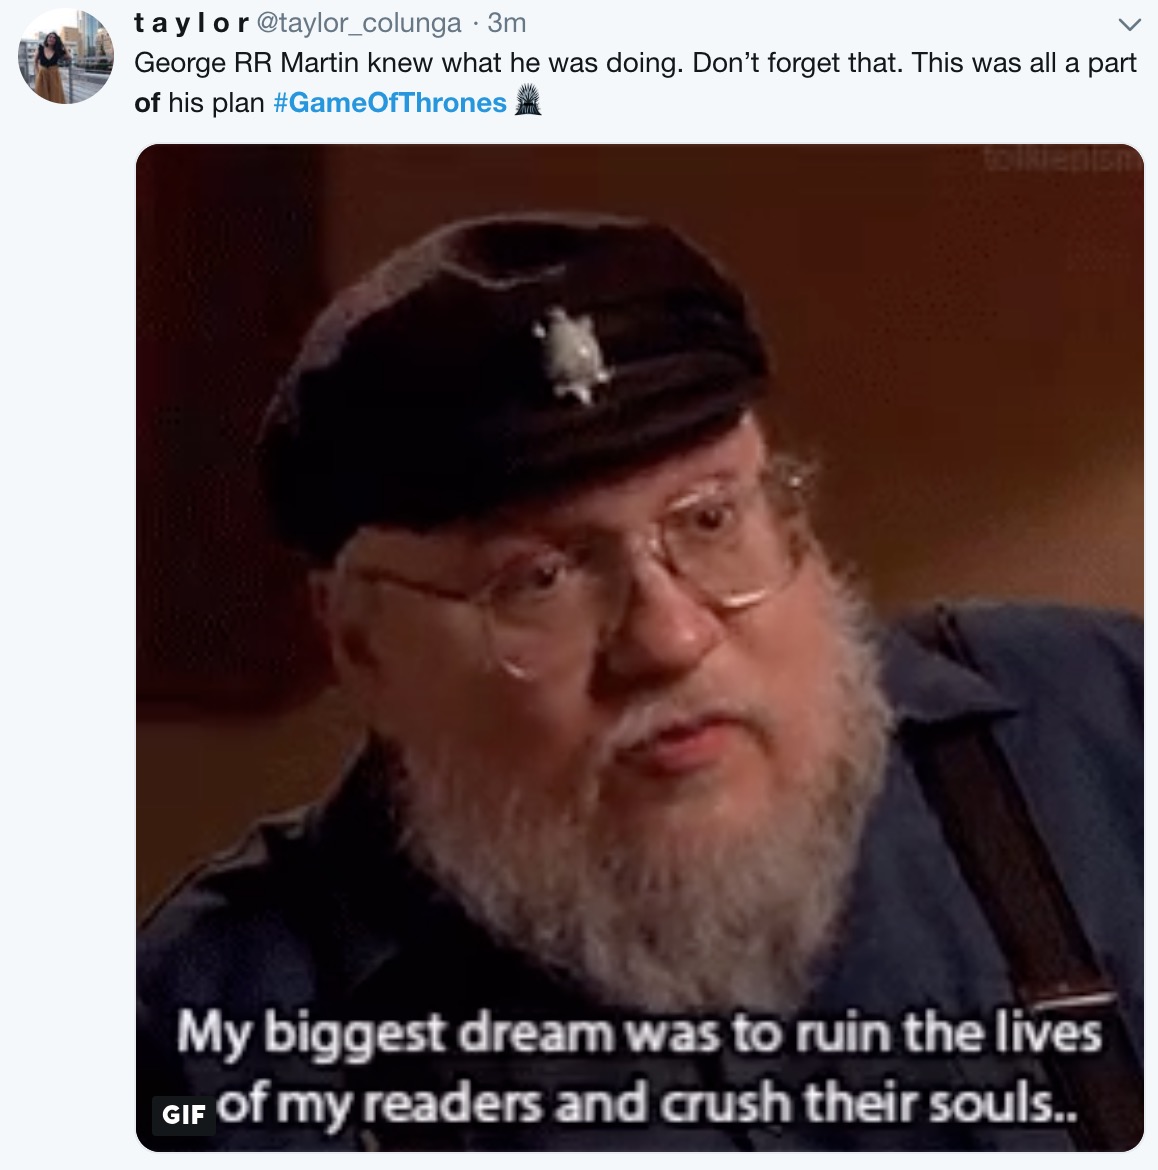 game of thrones final episode meme - beard - taylor 3m George Rr Martin knew what he was doing. Don't forget that. This was all a part of his plan My biggest dream was to ruin the lives Gif of my readers and crush their souls..